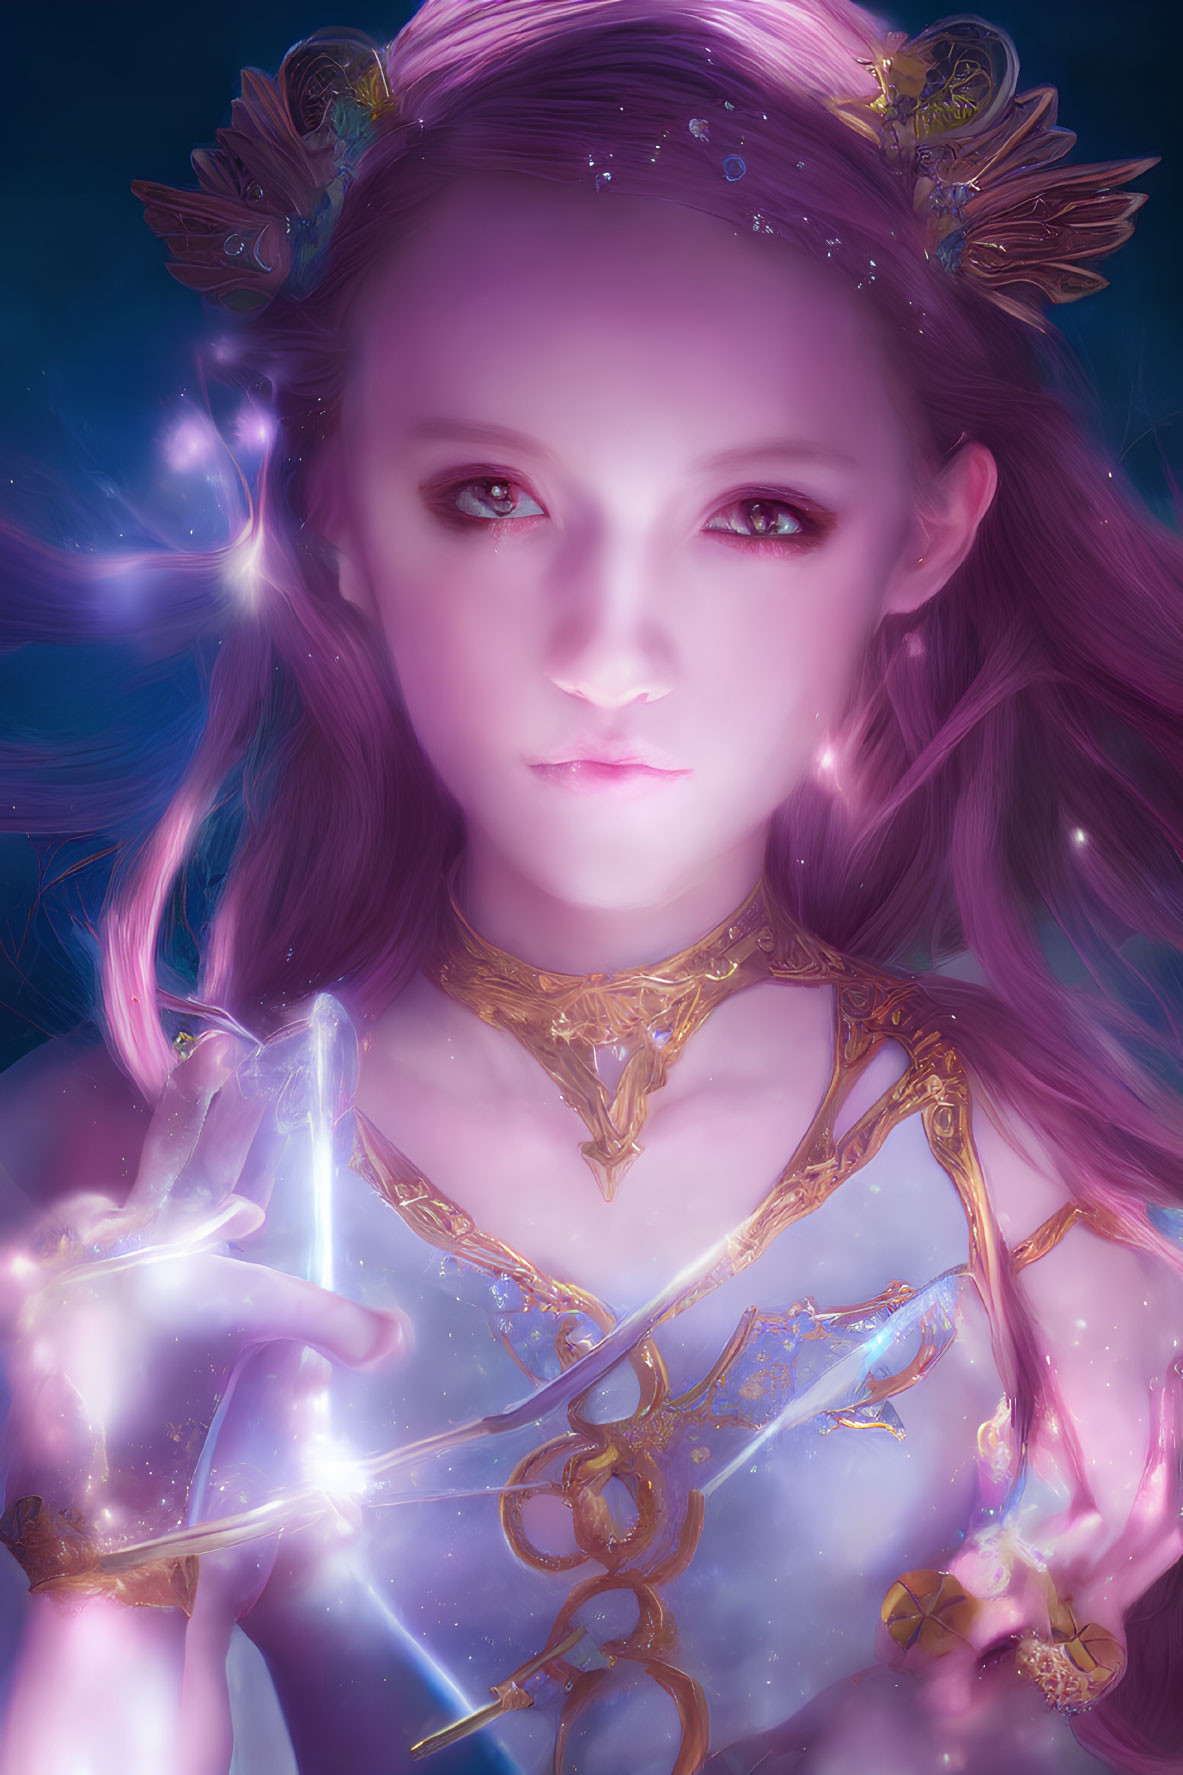 Fantasy digital artwork of female figure with pink hair and celestial attire